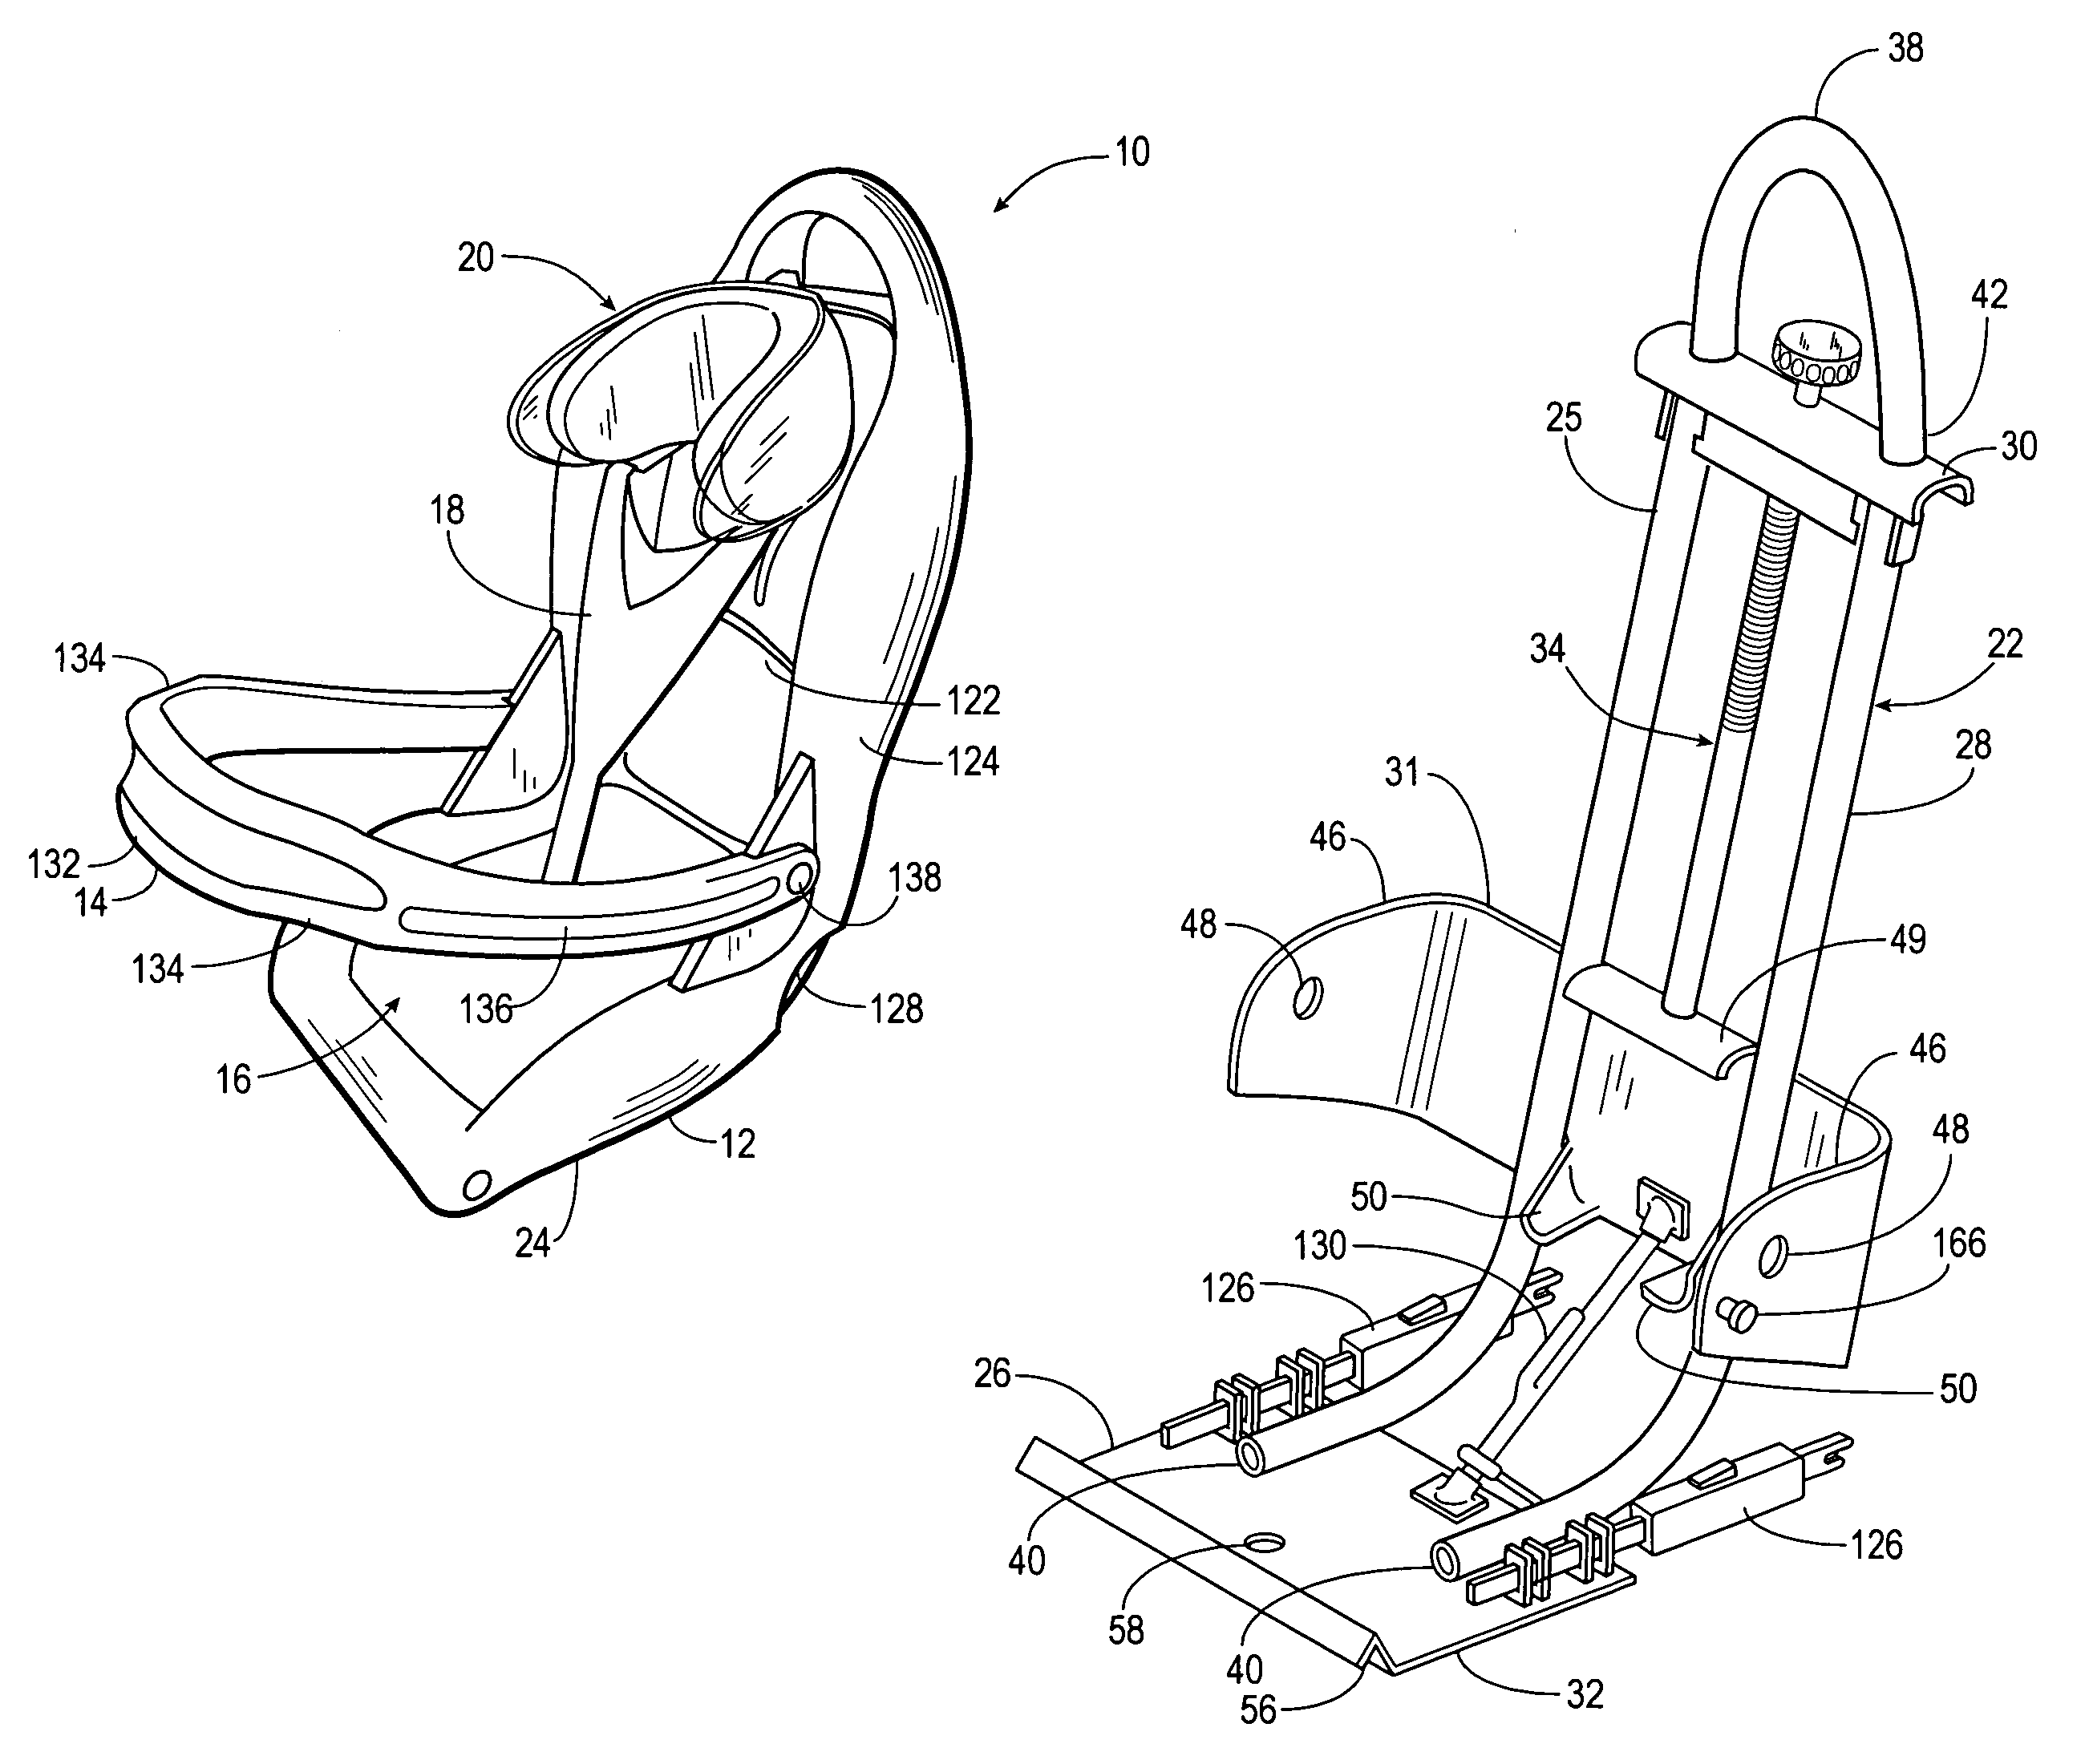 Child restraint apparatus for a vehicle